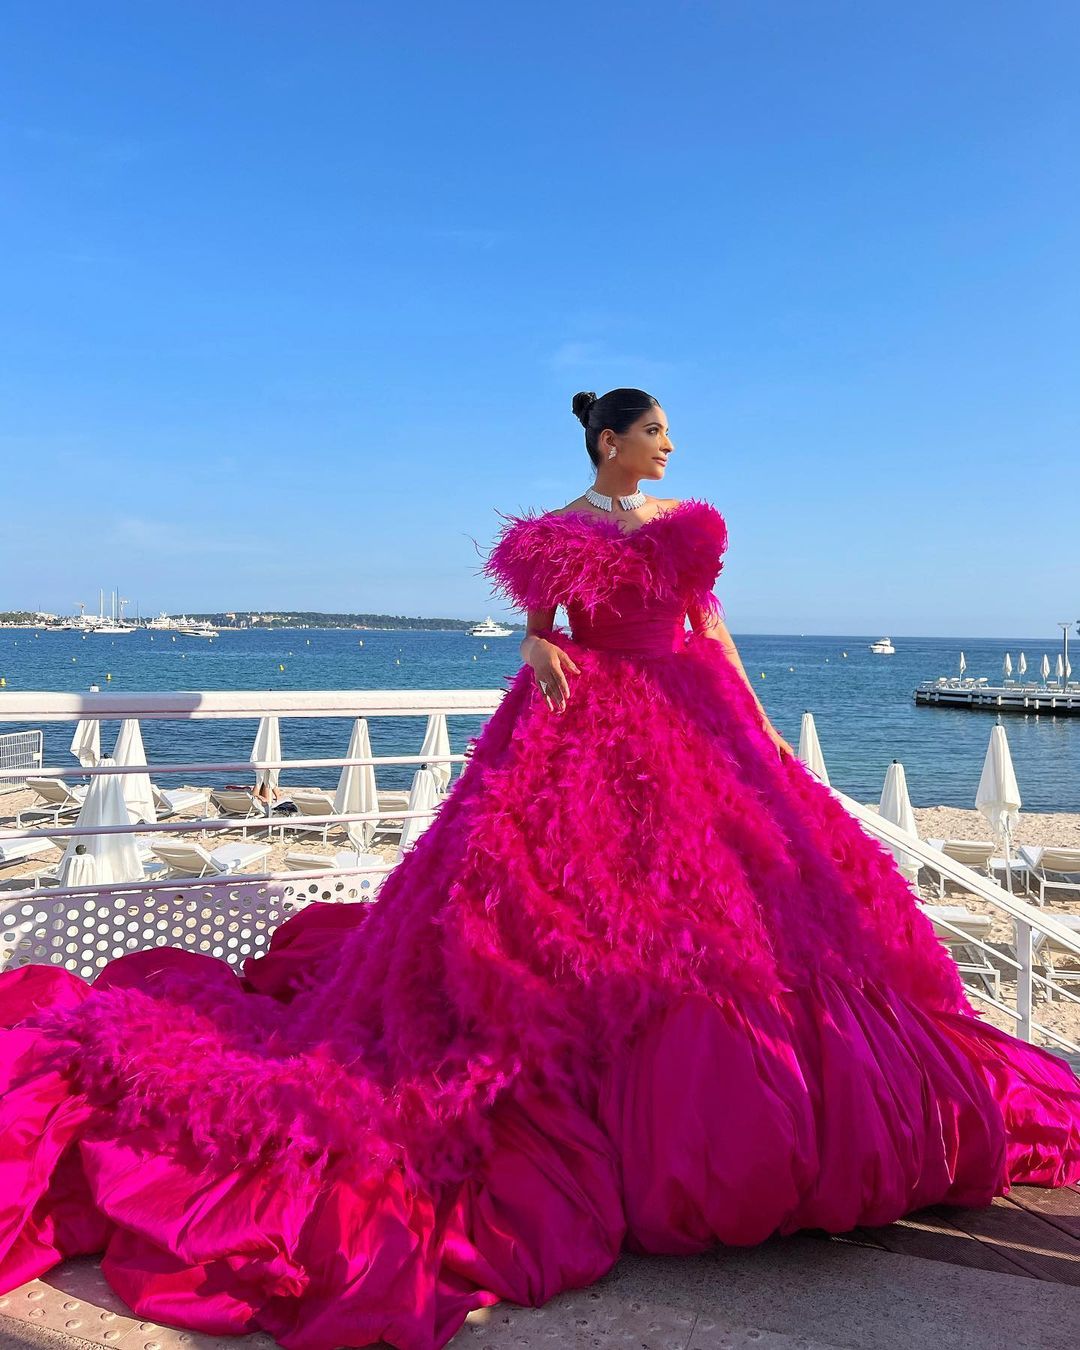 Arabs Take Over Best Dressed At Cannes Film Festival 2022